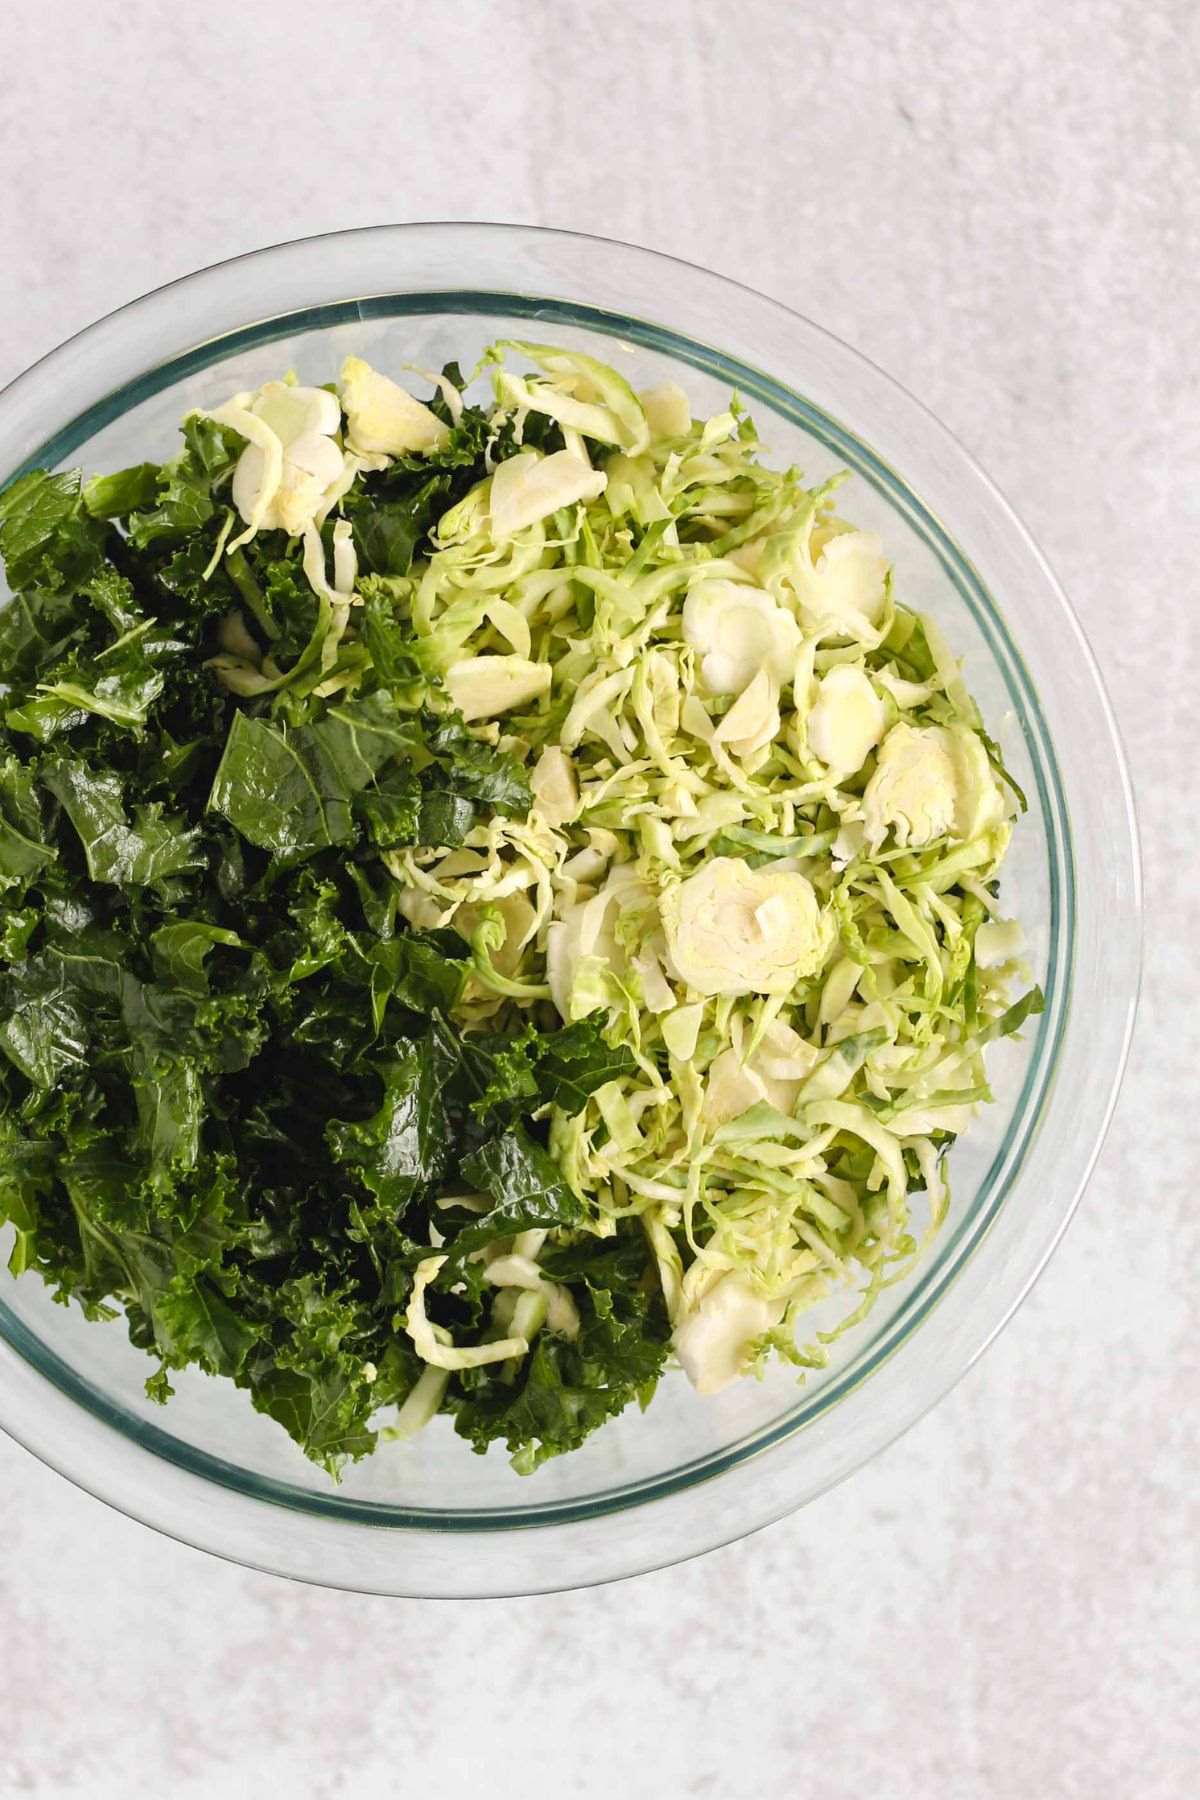 Shaved Brussels sprouts and kale leaves in a glass mixing bowl.